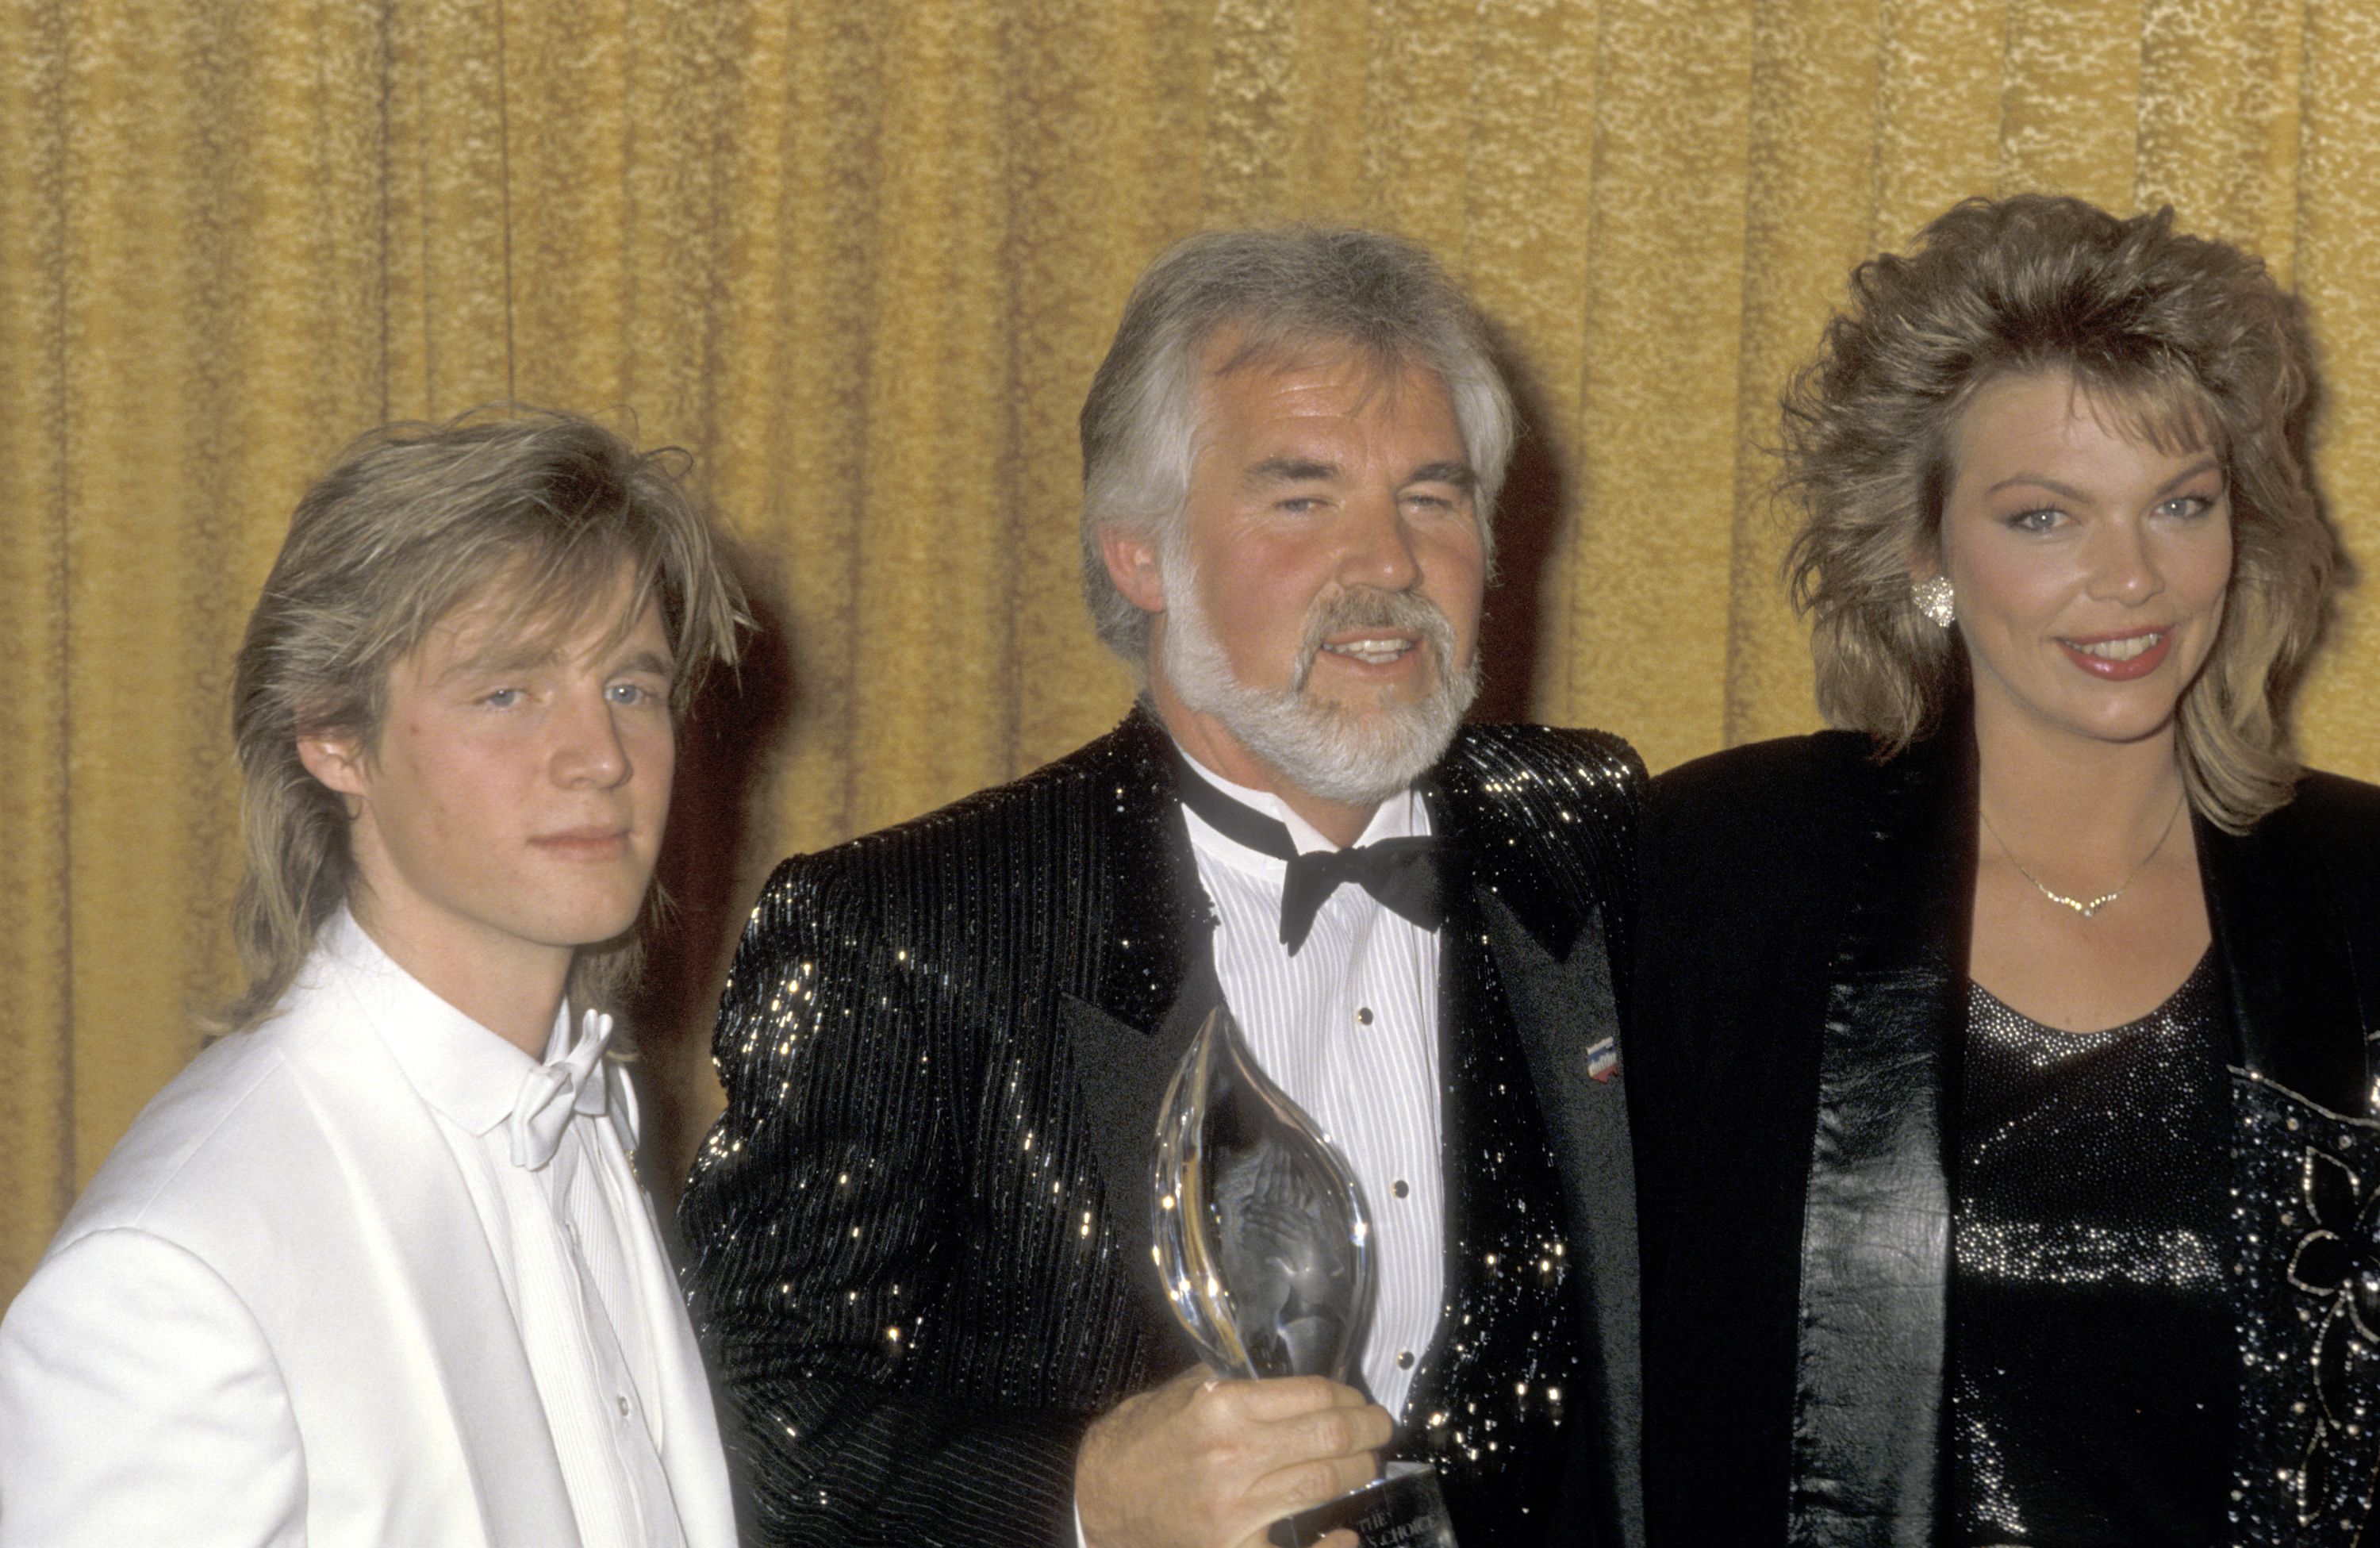 Kenny Rogers, son Kenny Rogers, Jr. and daughter Carole Rogers at the 12th Annual People's Choice Awards in 1986 | Source: Getty Images